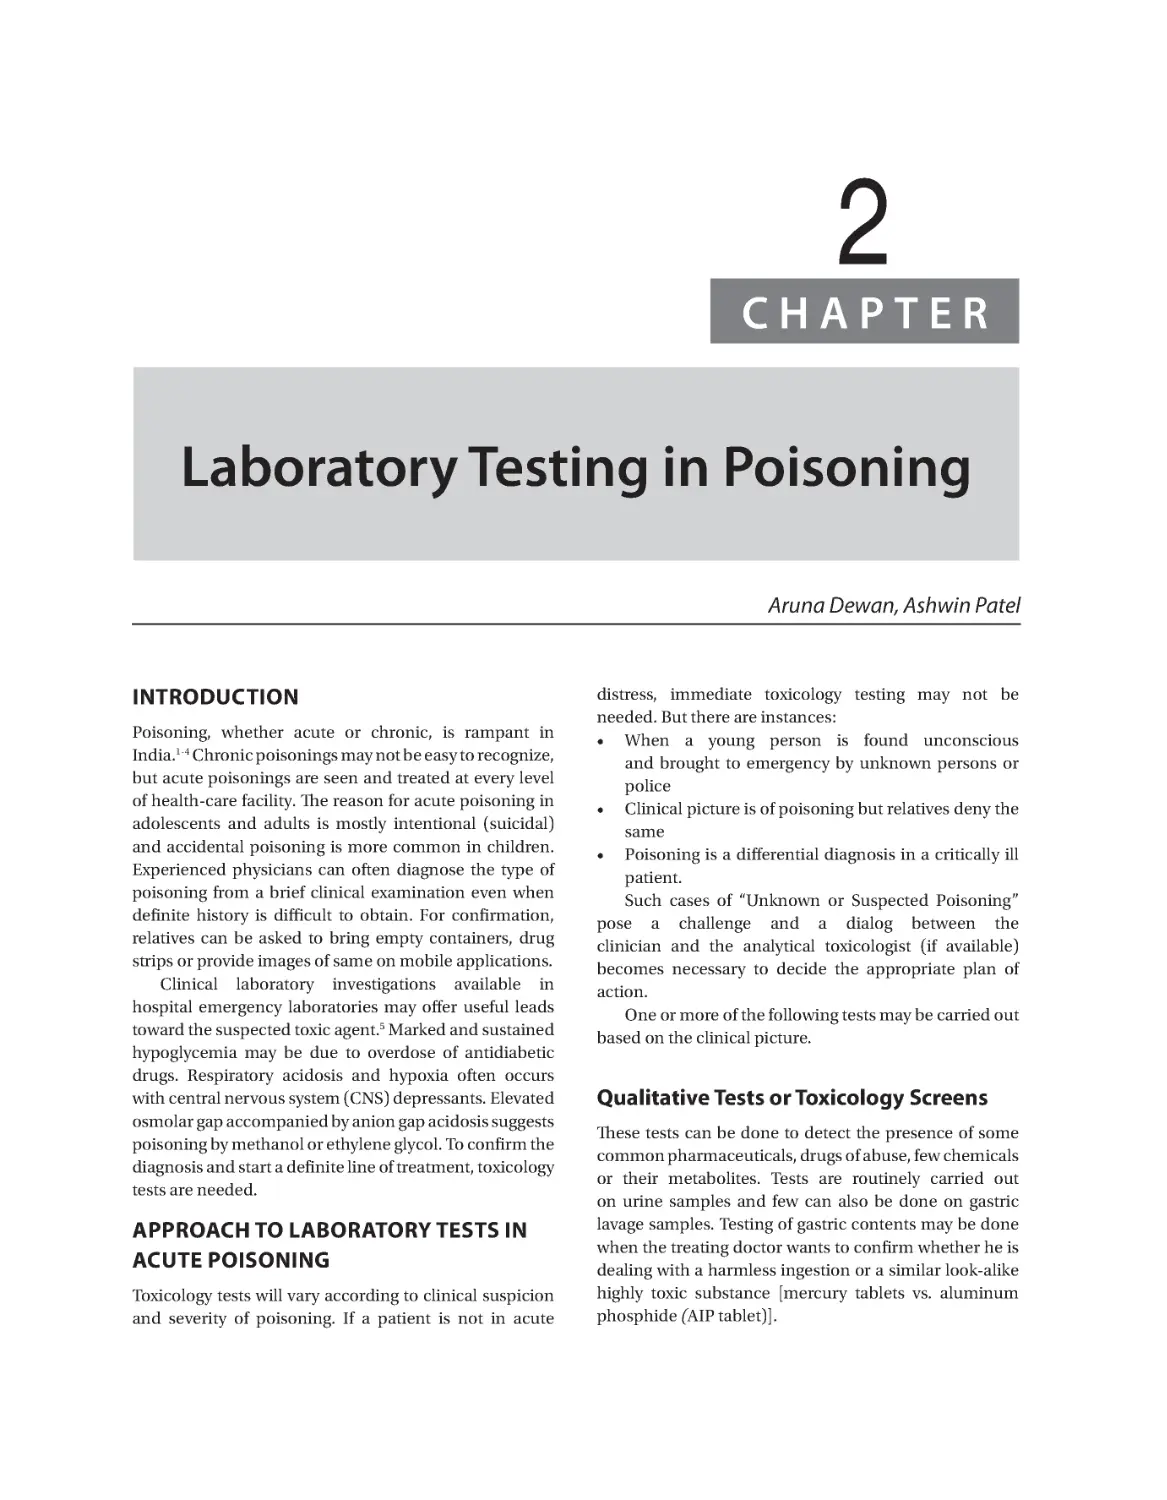 Chapter 2: Laboratory Testing in Poisoning